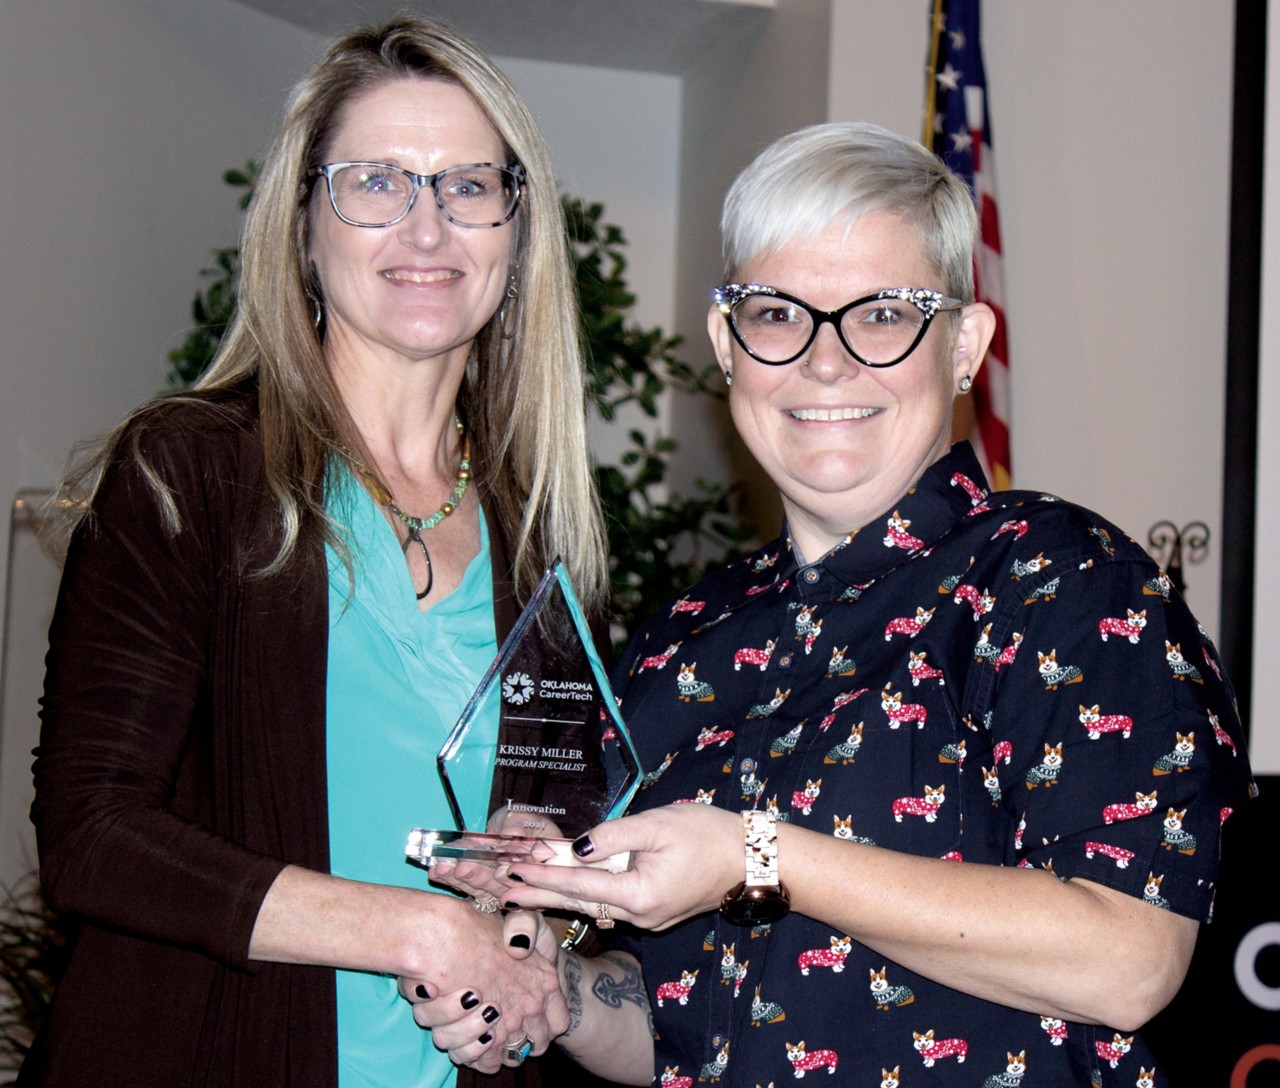 Krissy Miller, right, received an Innovations Pinnacle Award. With her is Oklahoma CareerTech State Director Marcie Mack.